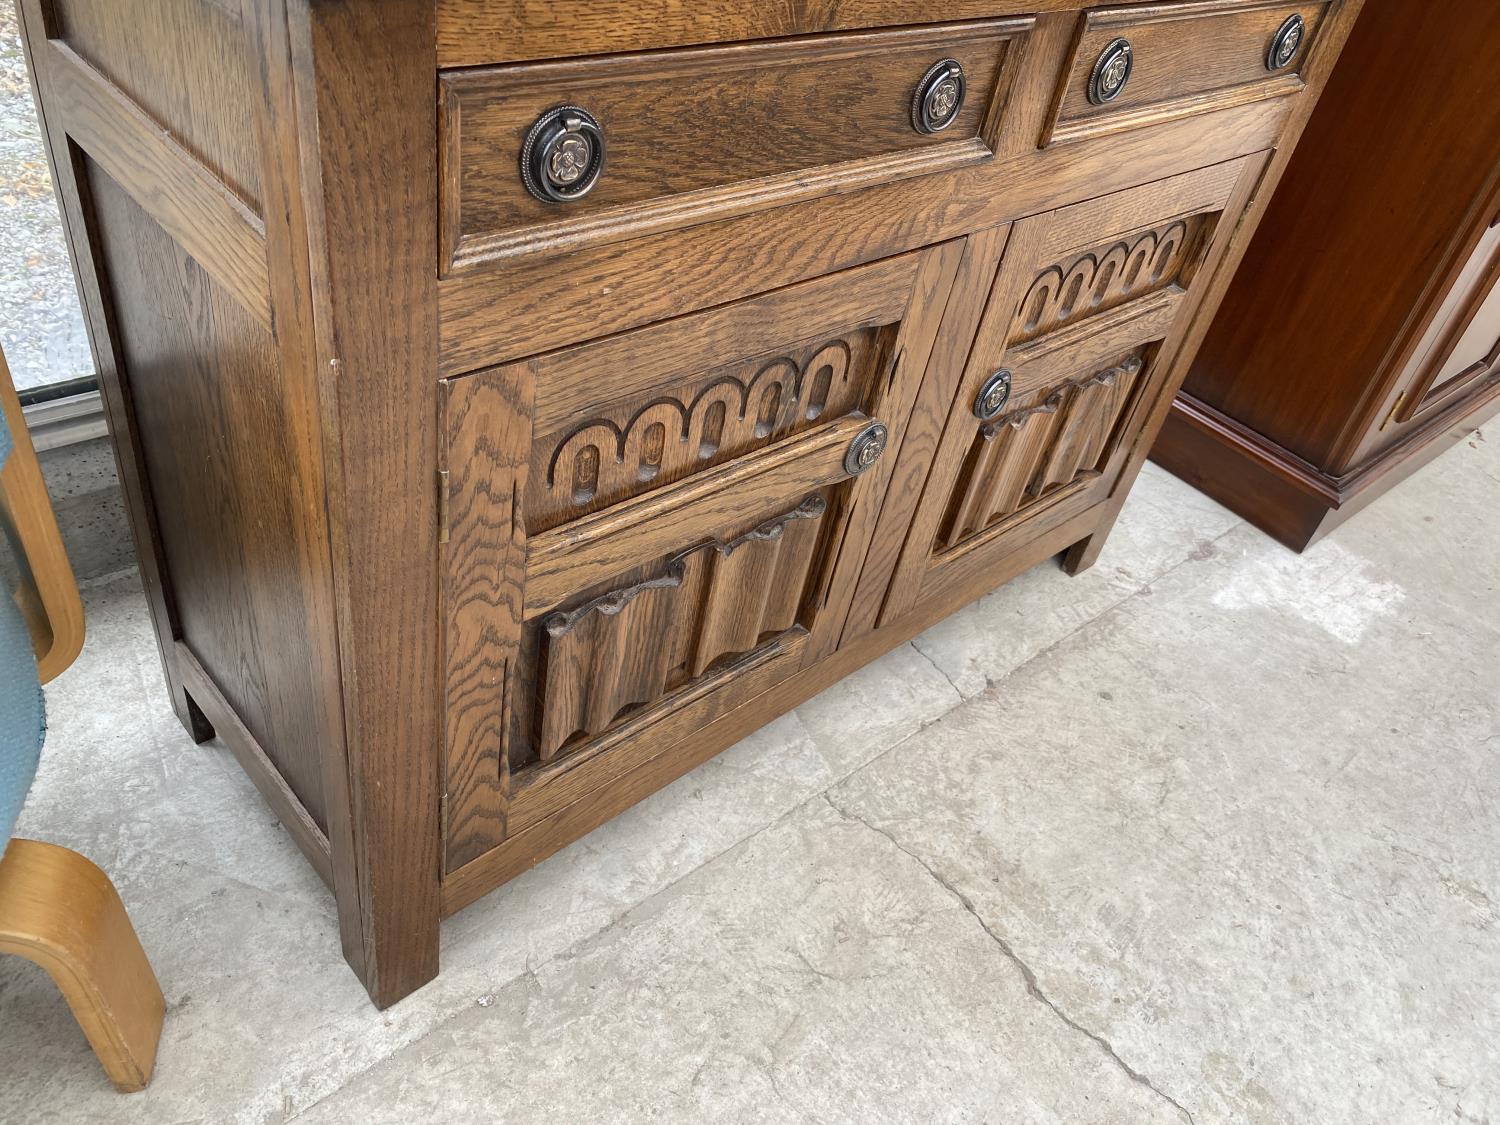 AN OAK WELSH DRESSER WITH TWO DOORS, TWO DRAWERS AND UPPER PLATE RACK - Image 4 of 4